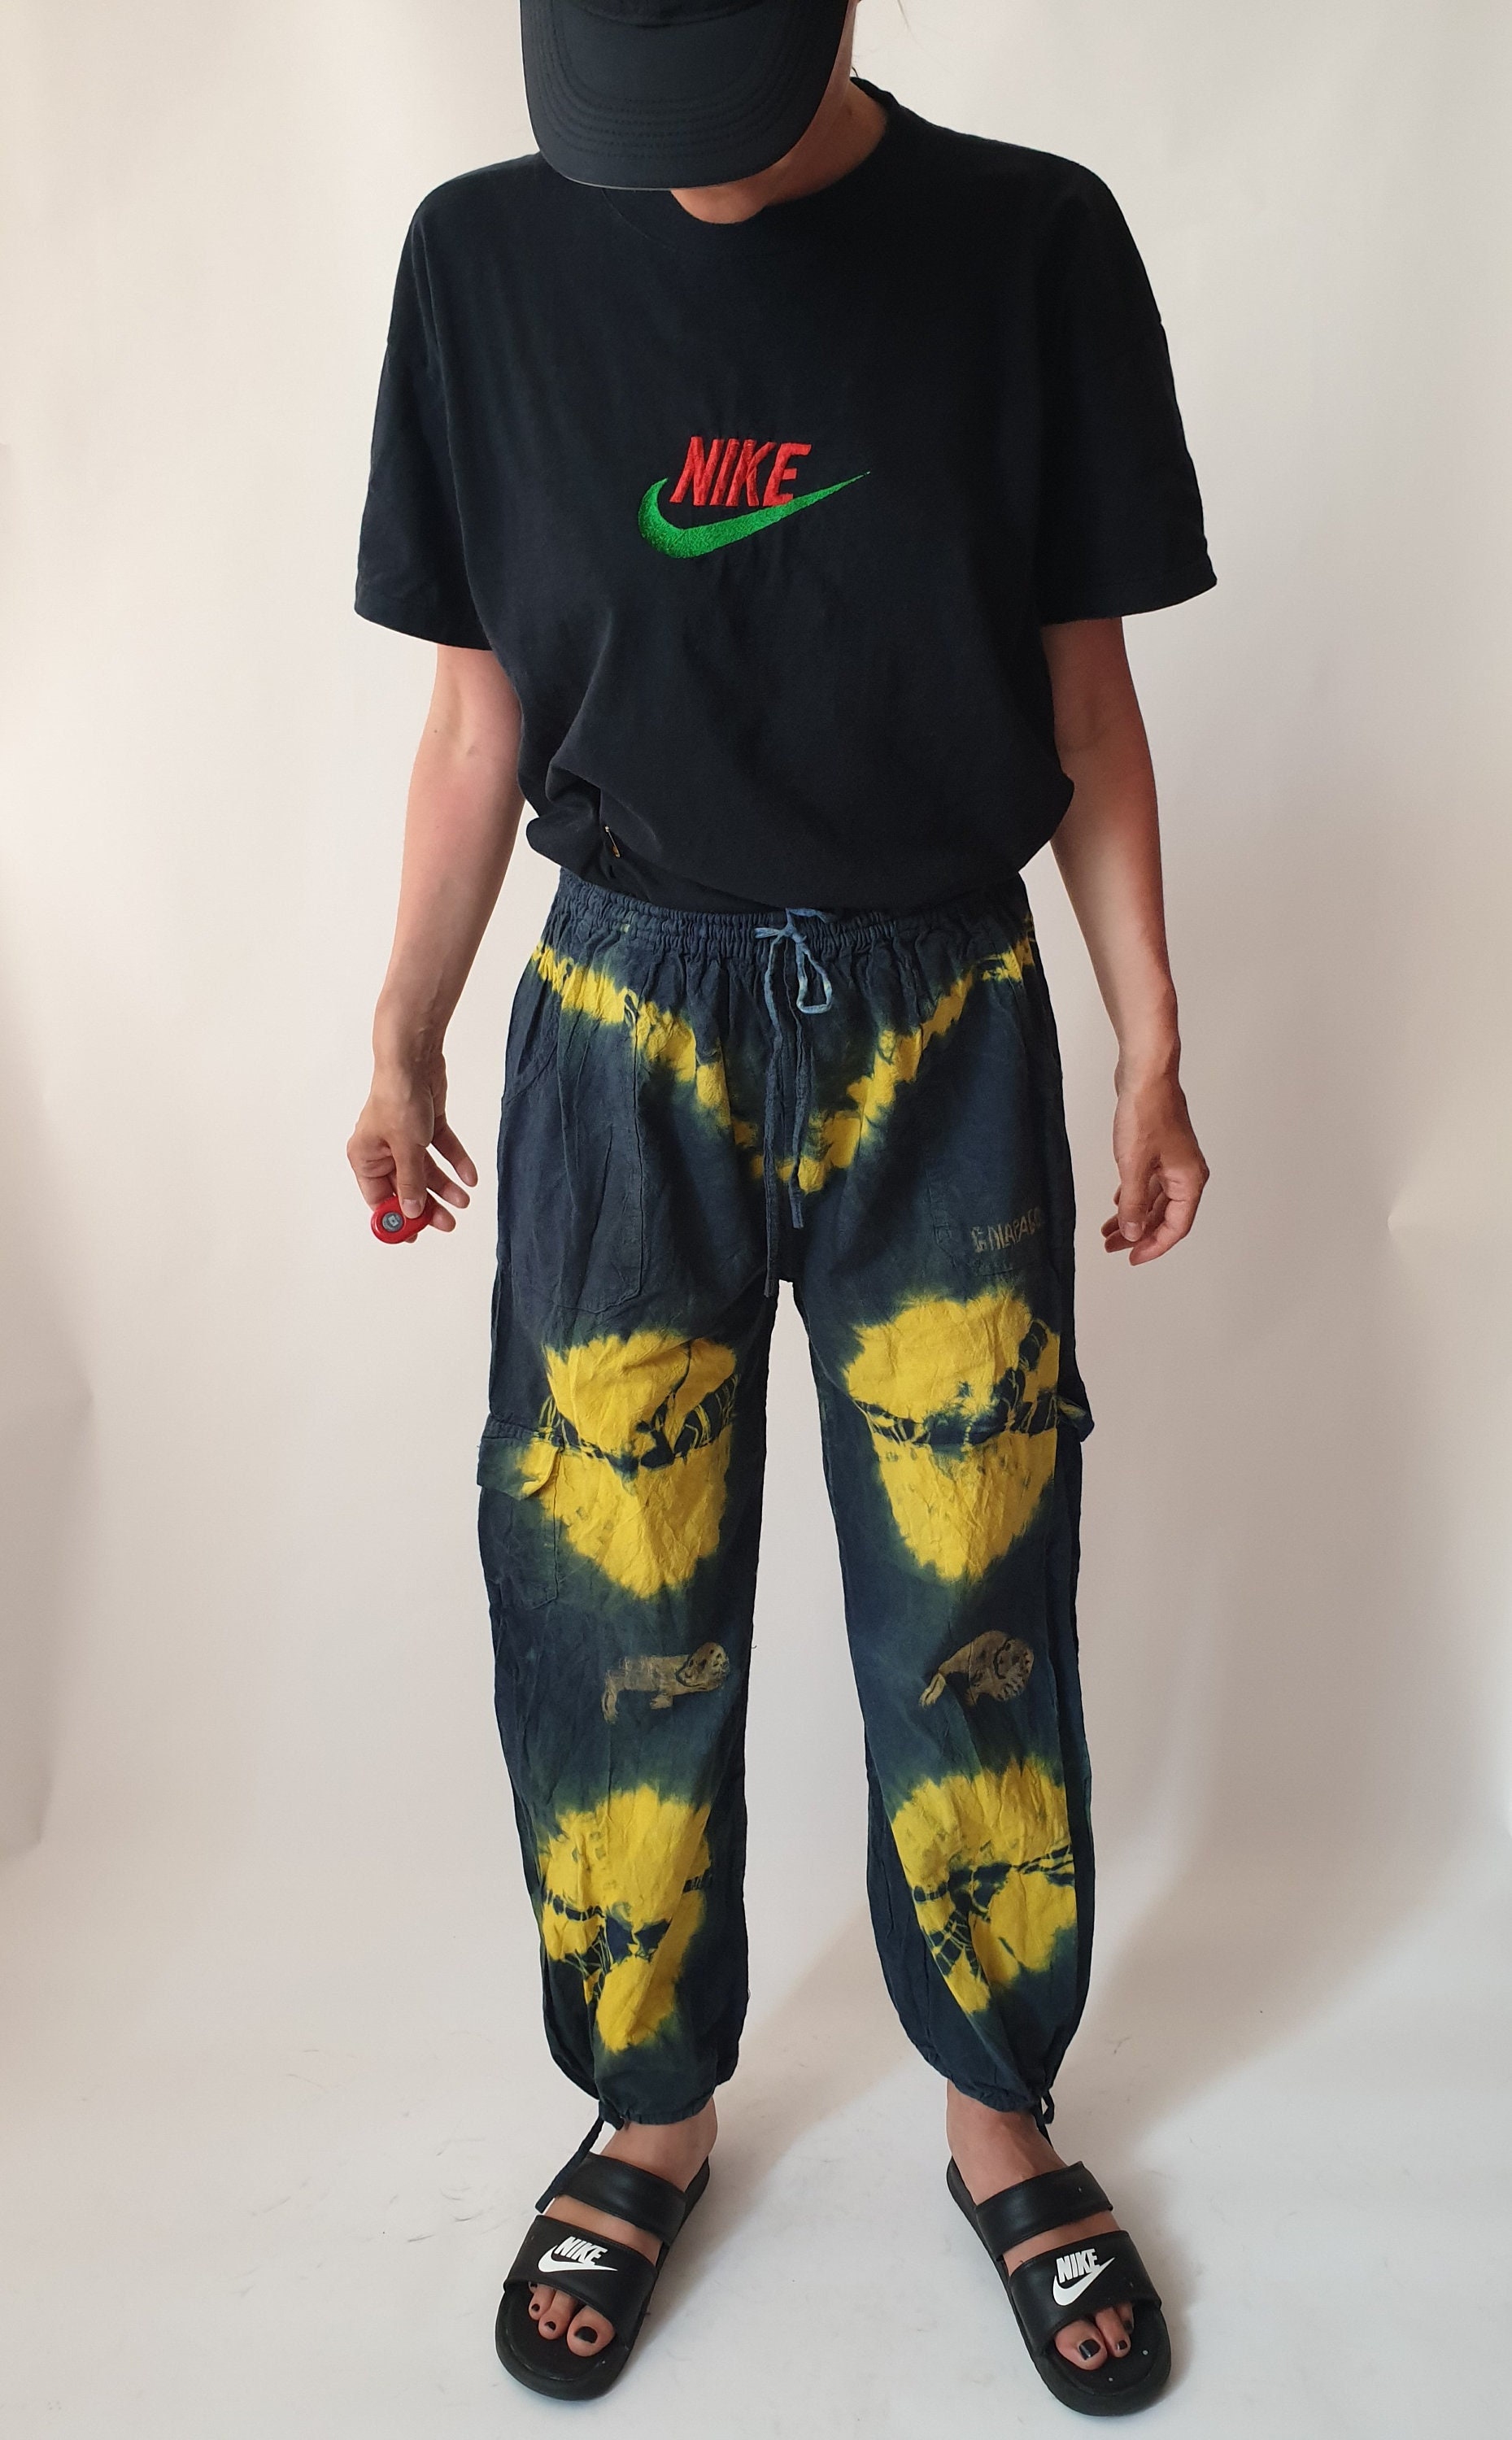 Vintage TIE DYE Trousers / 1990s, Elastic Waist, Drawstring Tapered Relaxed  Lounge / Hippie, Boho, Summer Festival Pants Size M Medium 